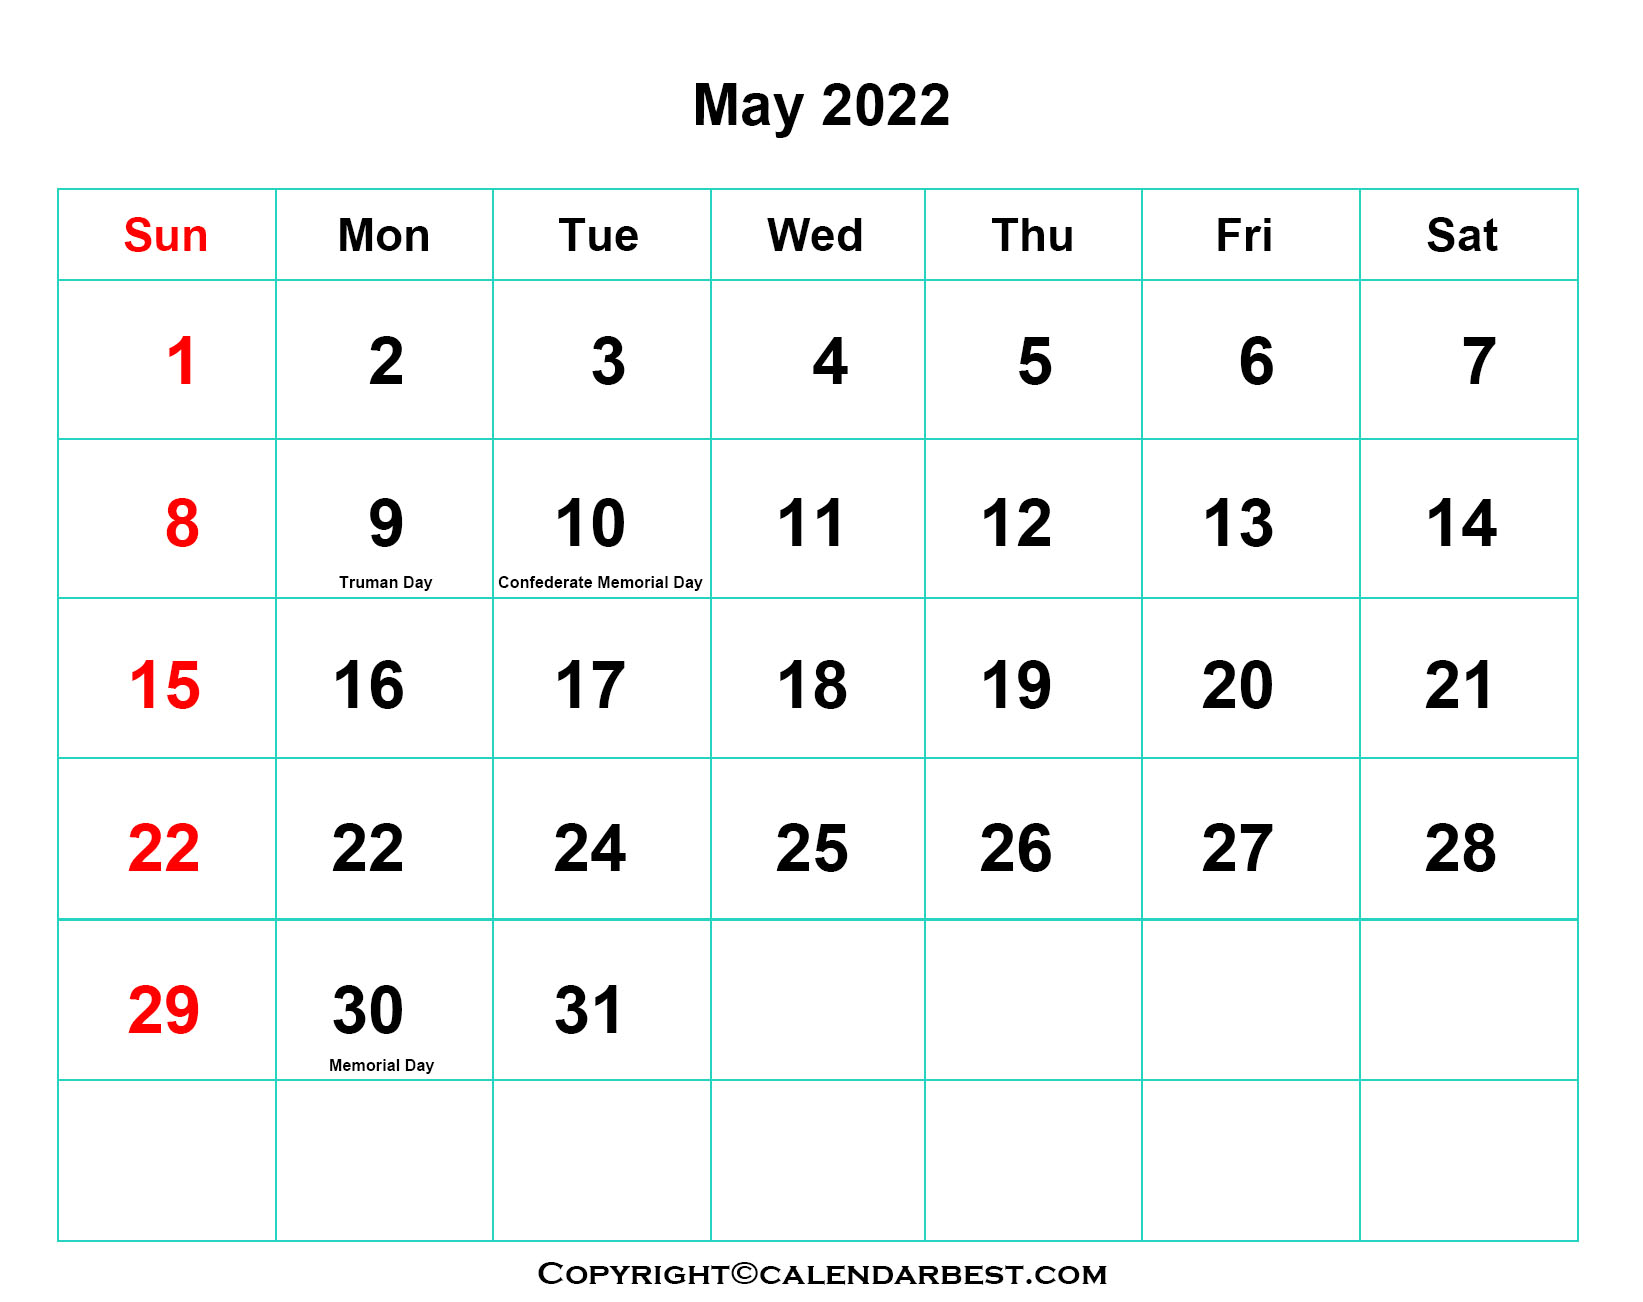 Free Printable May Calendar 2022 with Holidays in PDF